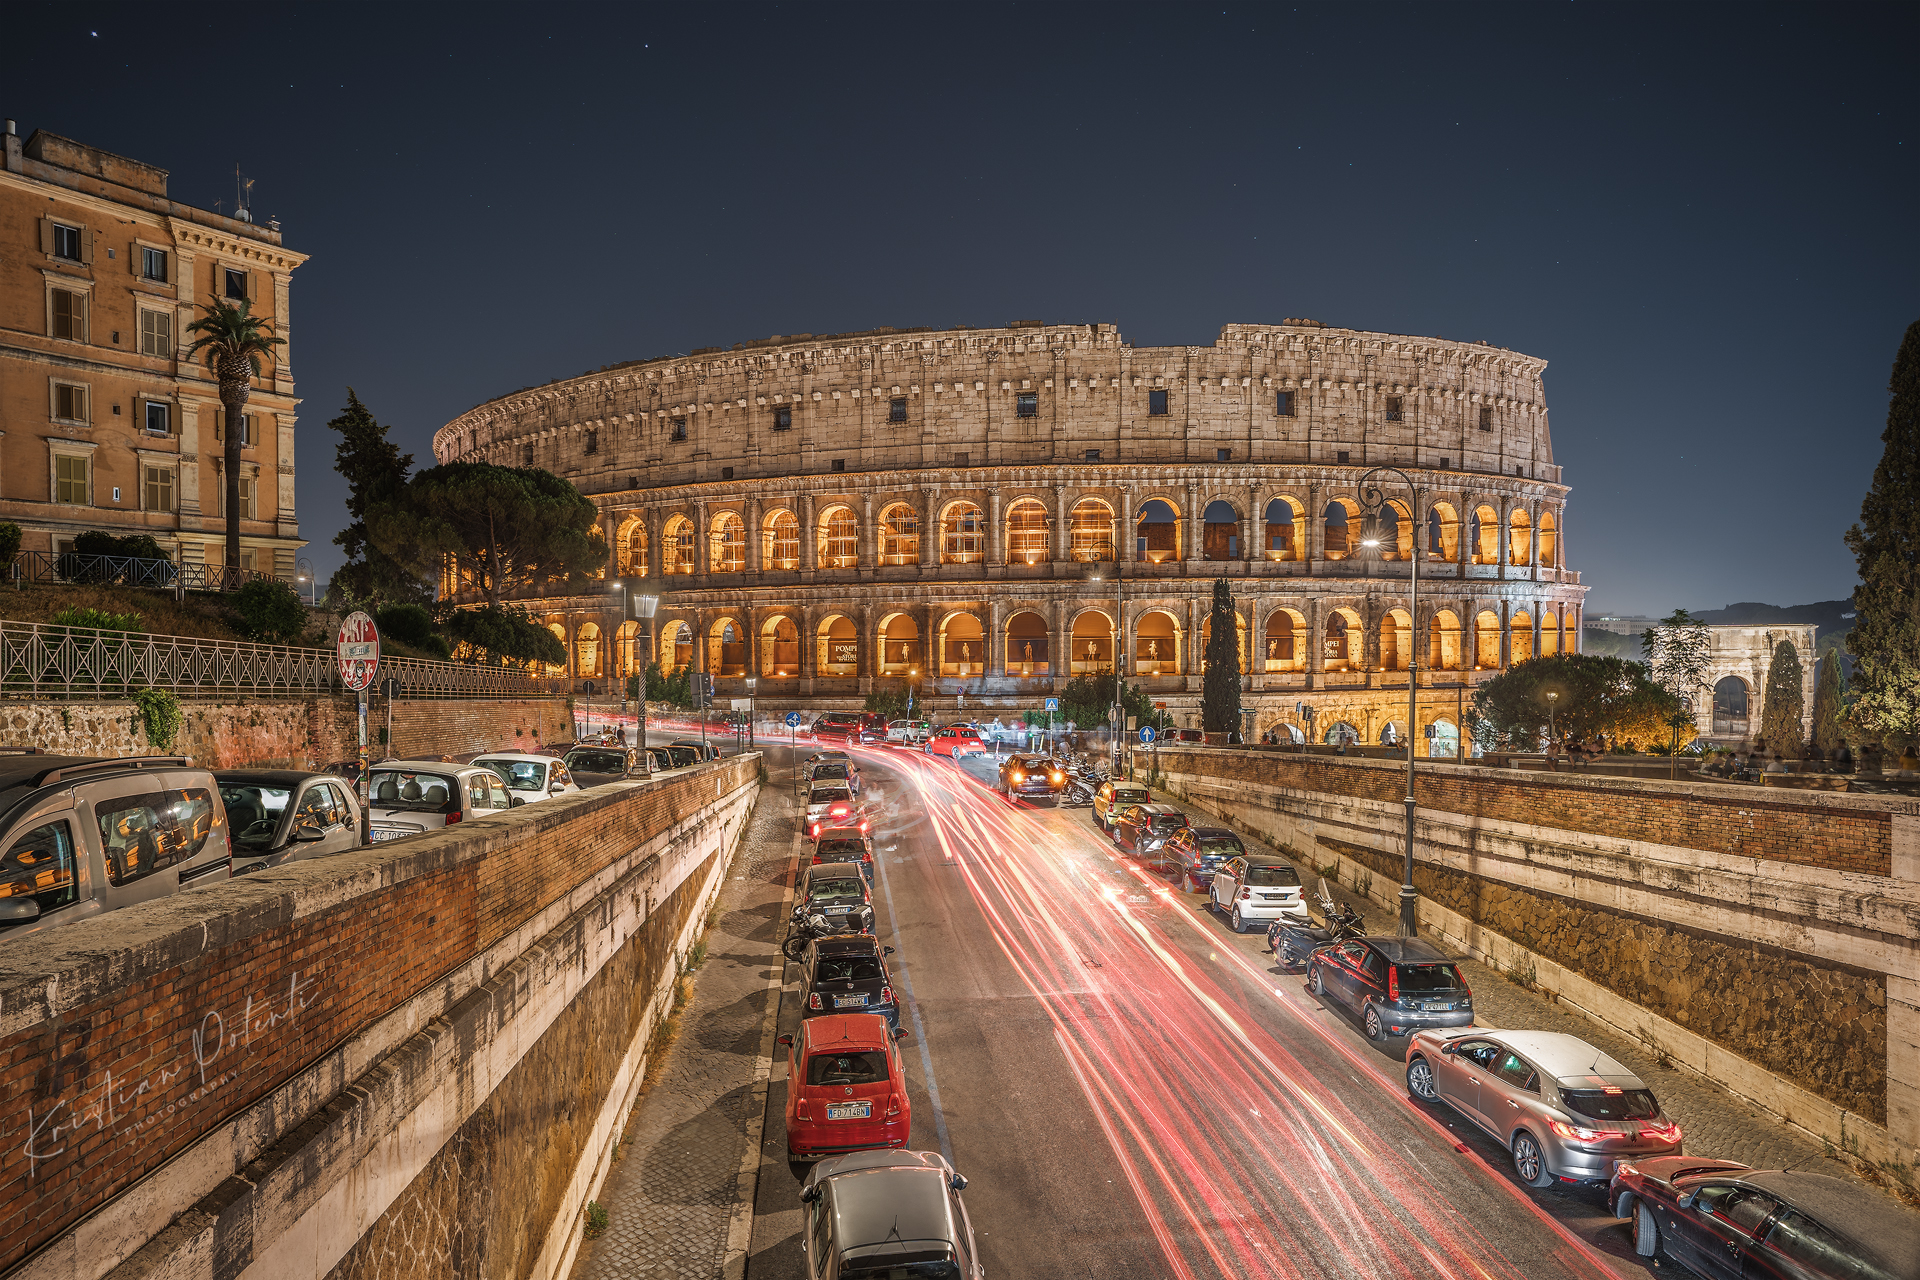 The Colosseum, the stars, the trails, Rome....